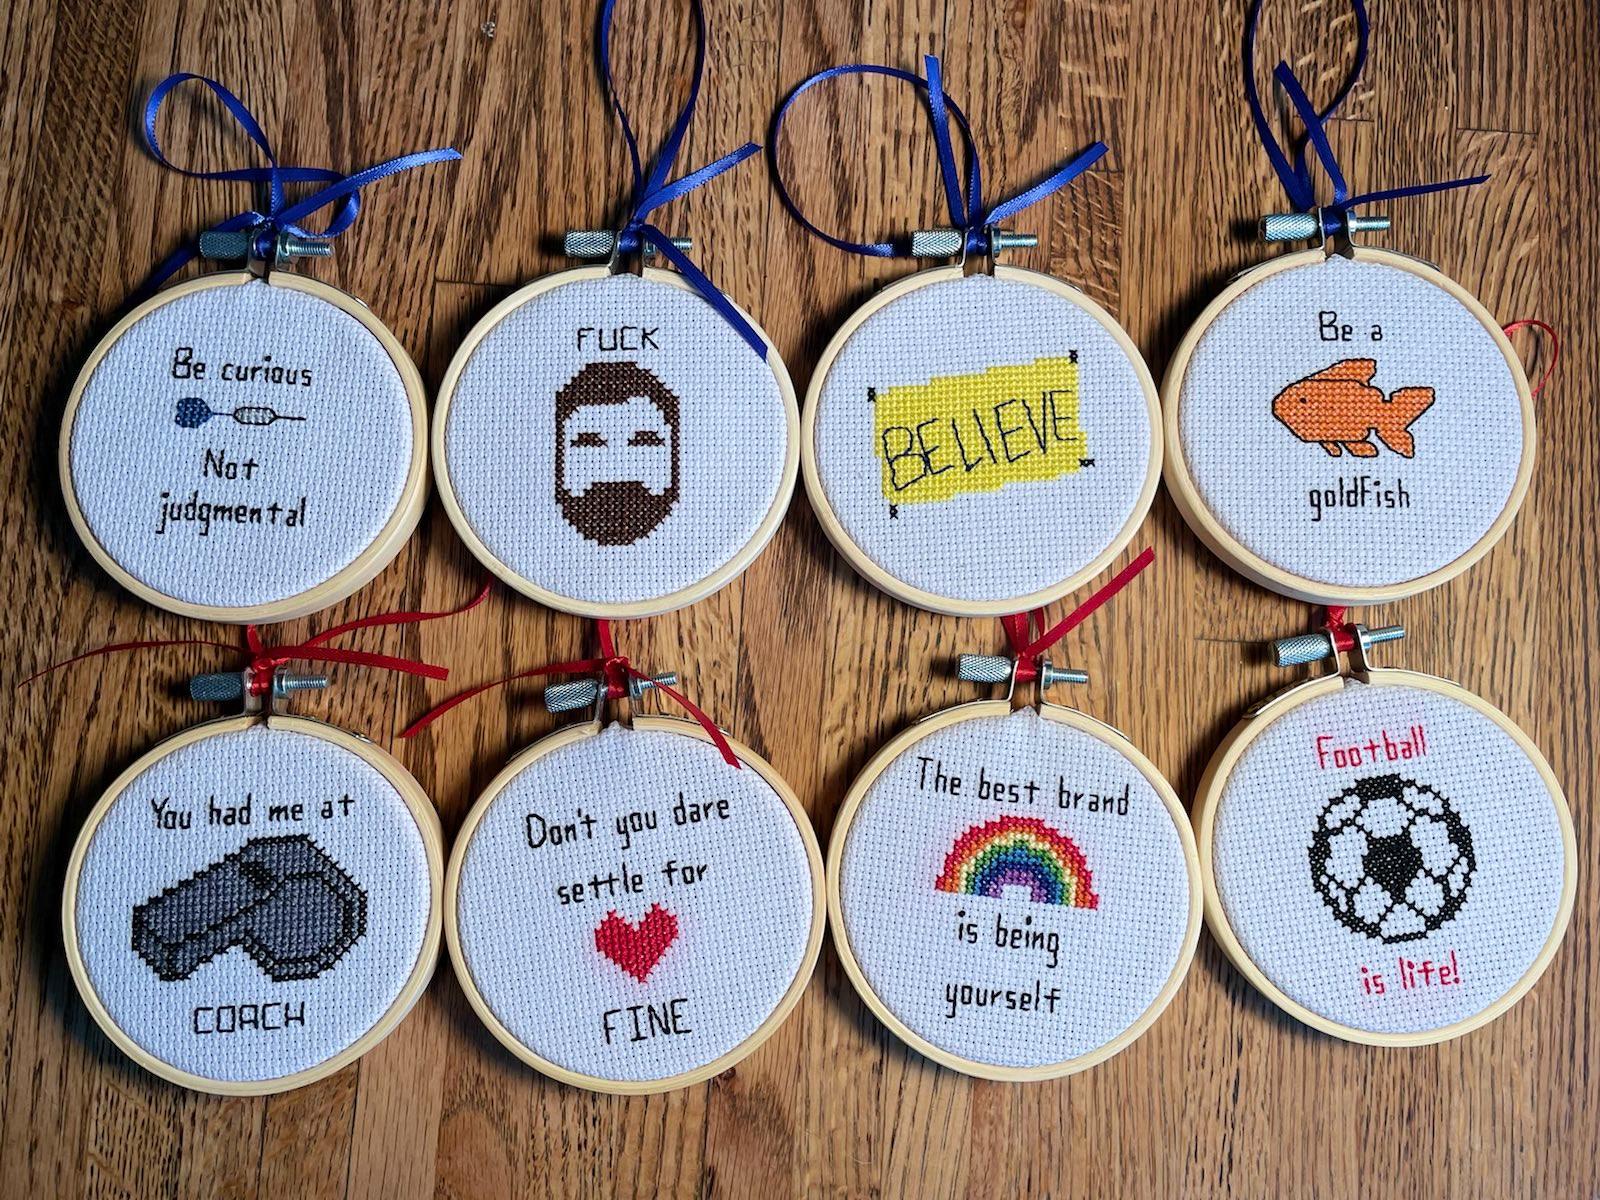 8 round cross-stitched ornaments with quotes from Ted Lasso TV show